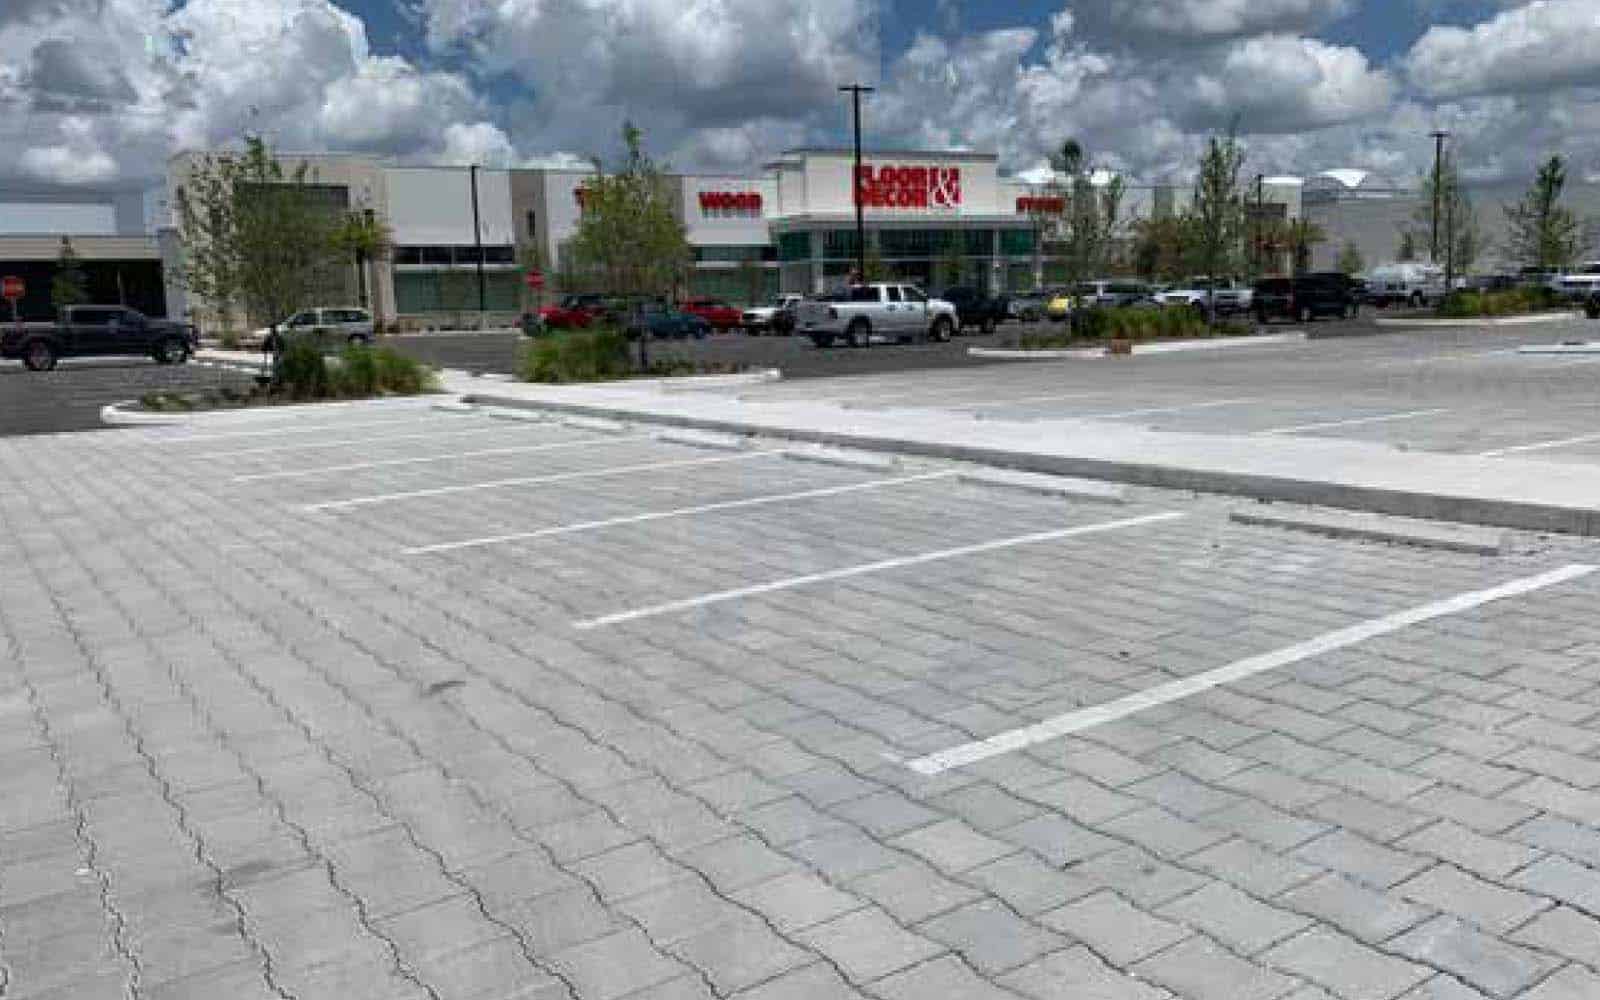 Case studies - results from installing permeable paving & machine technology to get an abandoned site up to stormwater code